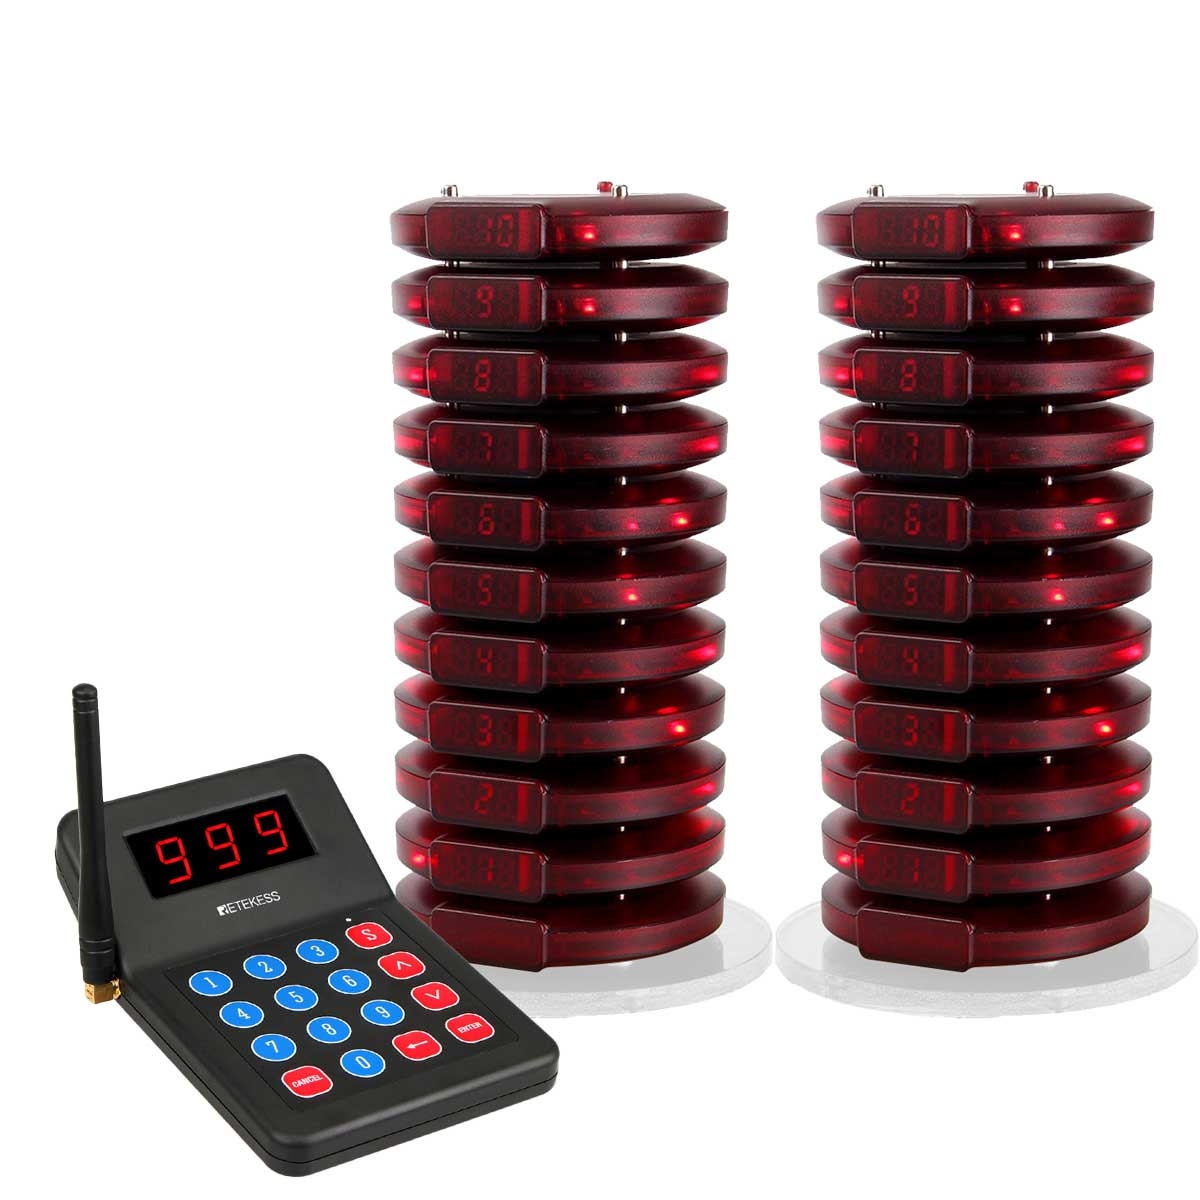 Retekess T119 Restaurant Pager System 1 Keypad 20 Pagers